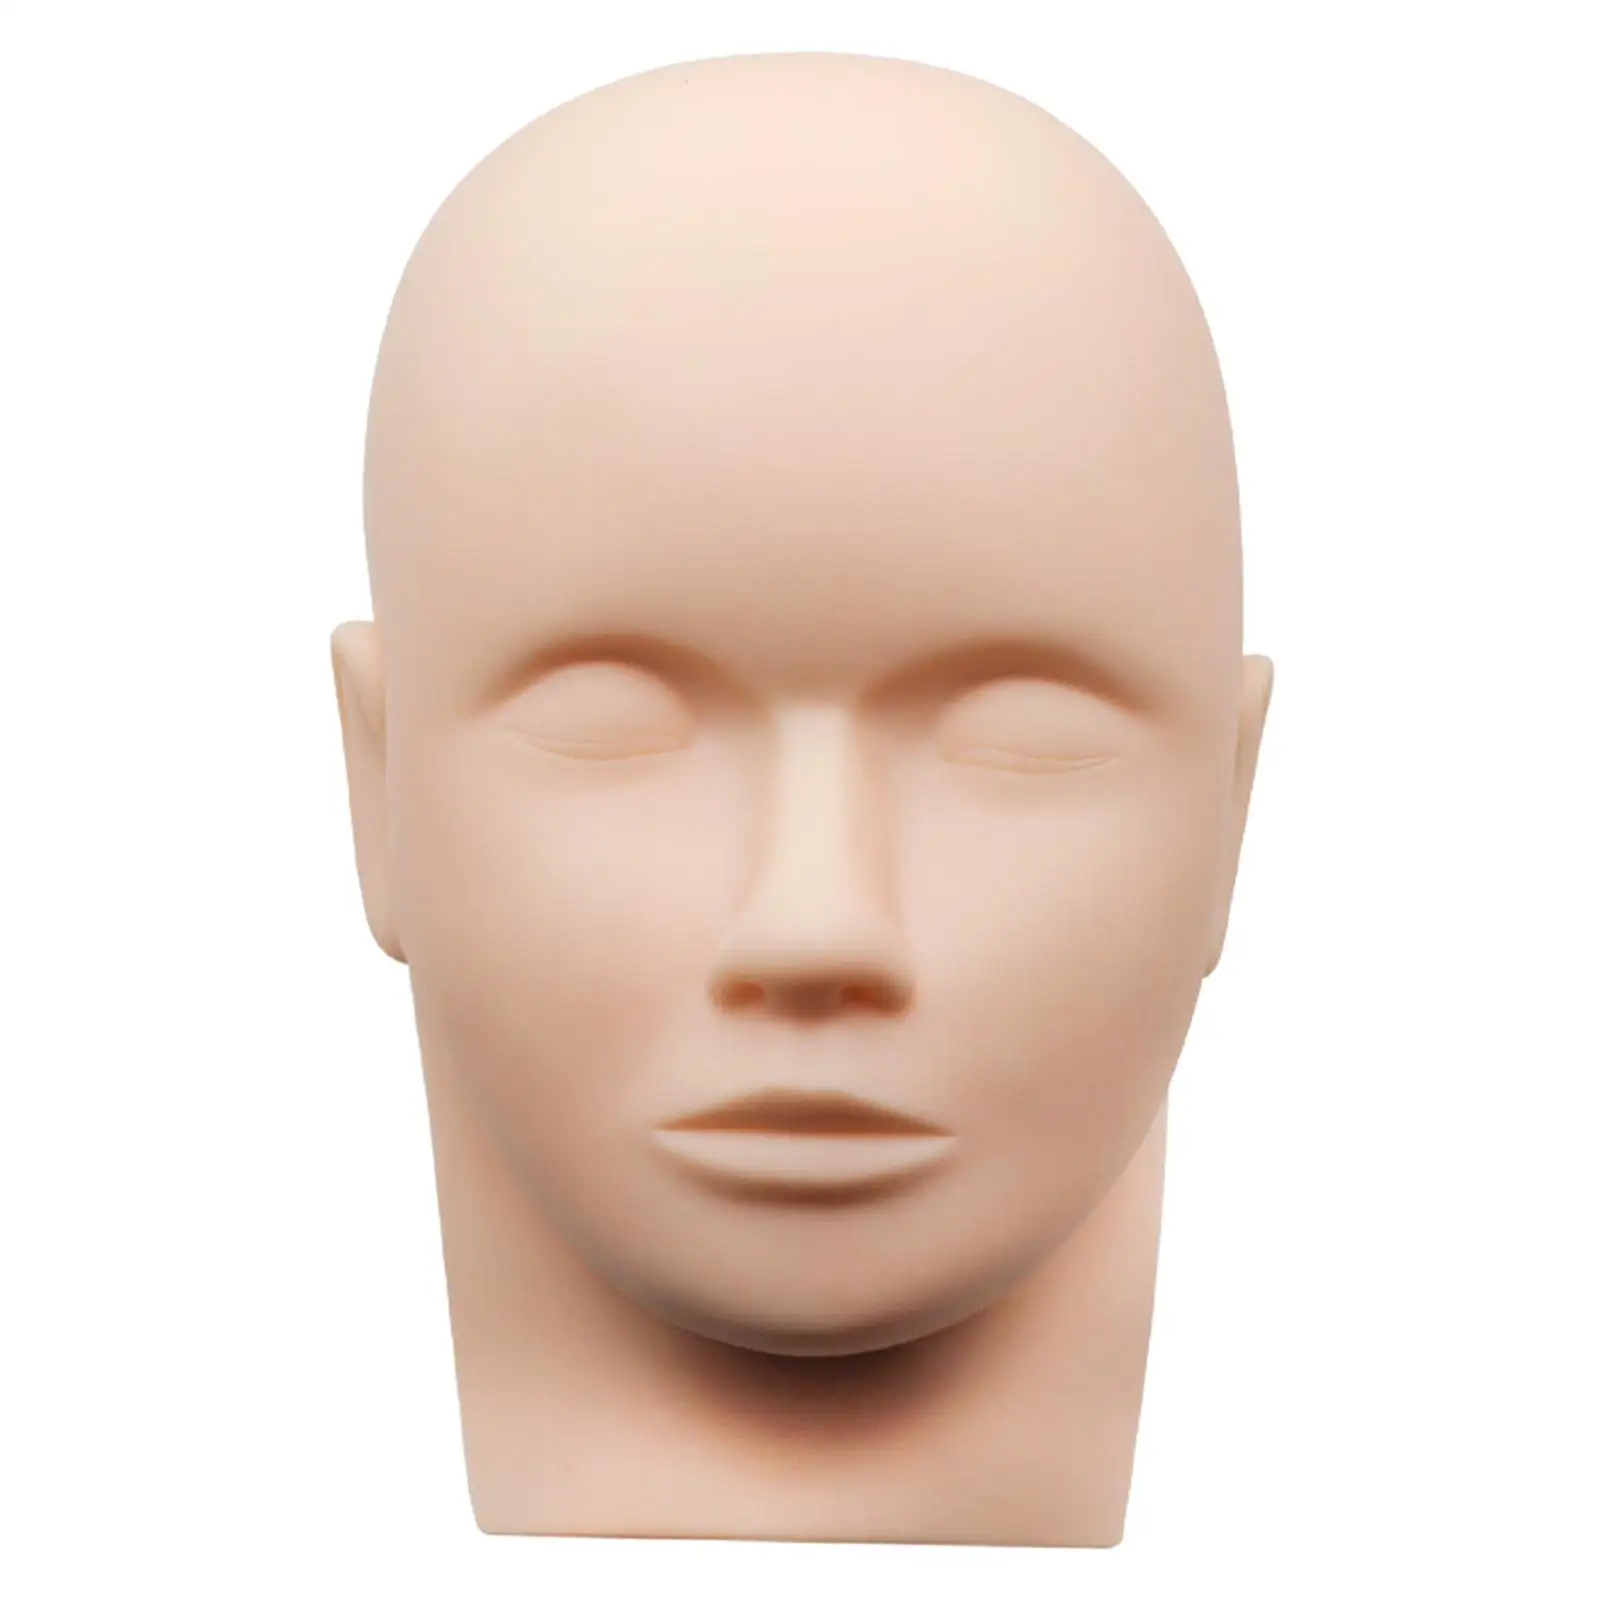 Eyelash Silicone Head Mold Soft Touch Lash Extension Supplies Practice Head Mannequin Cosmetology Make up Training